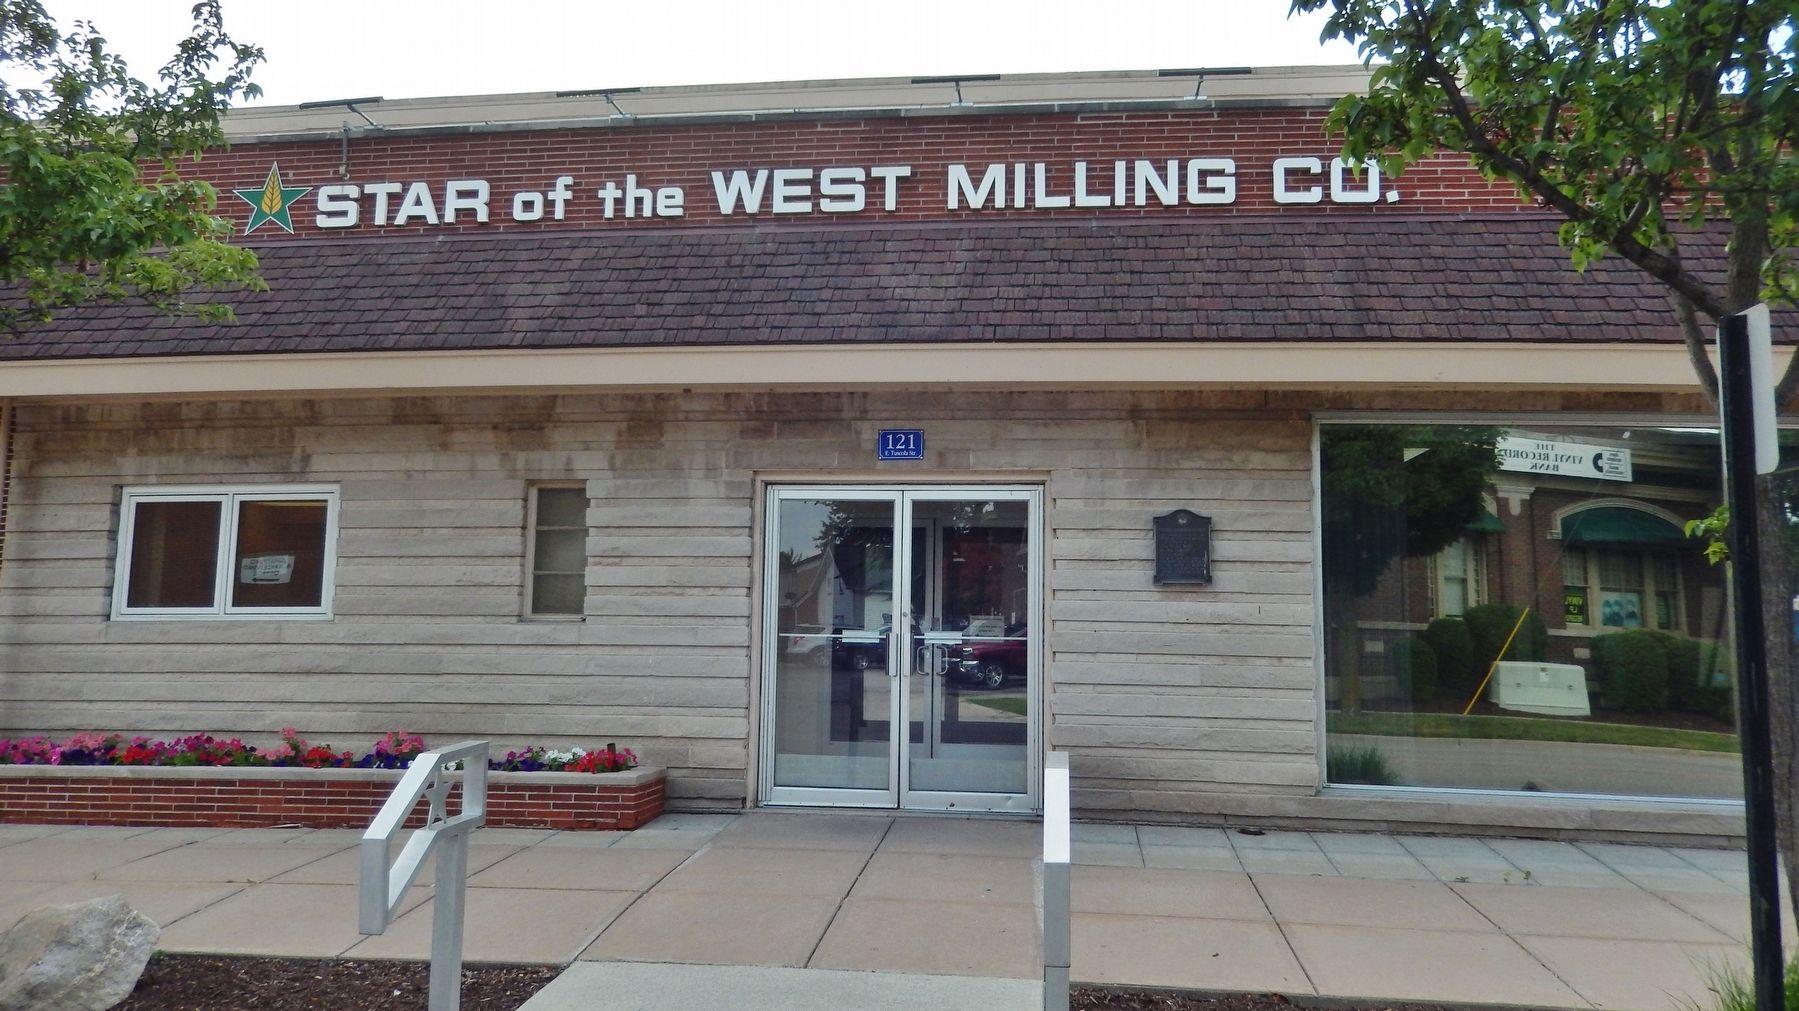 Star of the West Milling Company Marker (<i>wide view; marker visible right of door</i>) image. Click for full size.